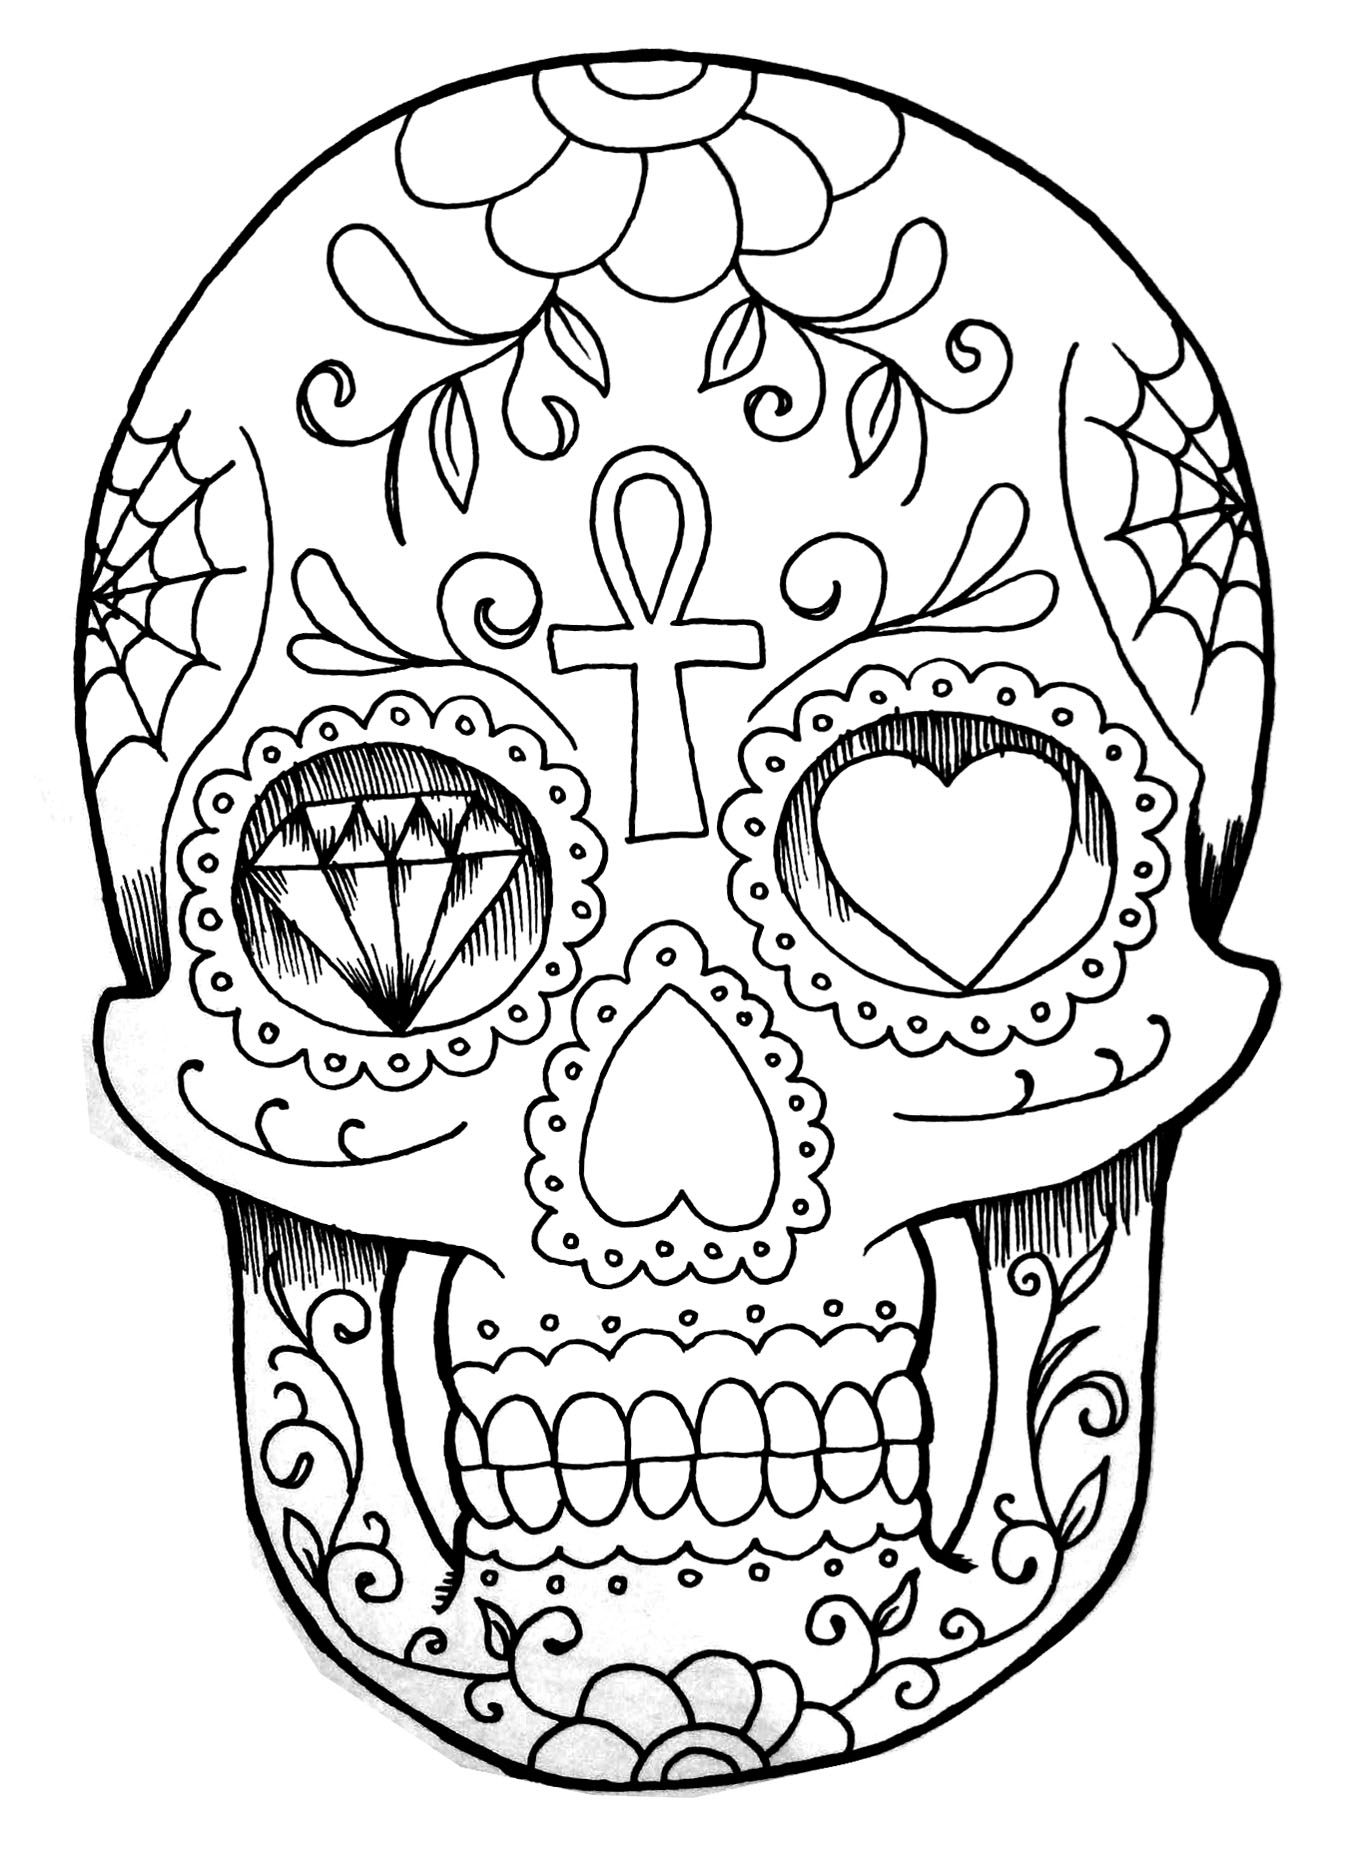 Coloring page: Anti-stress (Relaxation) #127171 - Printable coloring pages